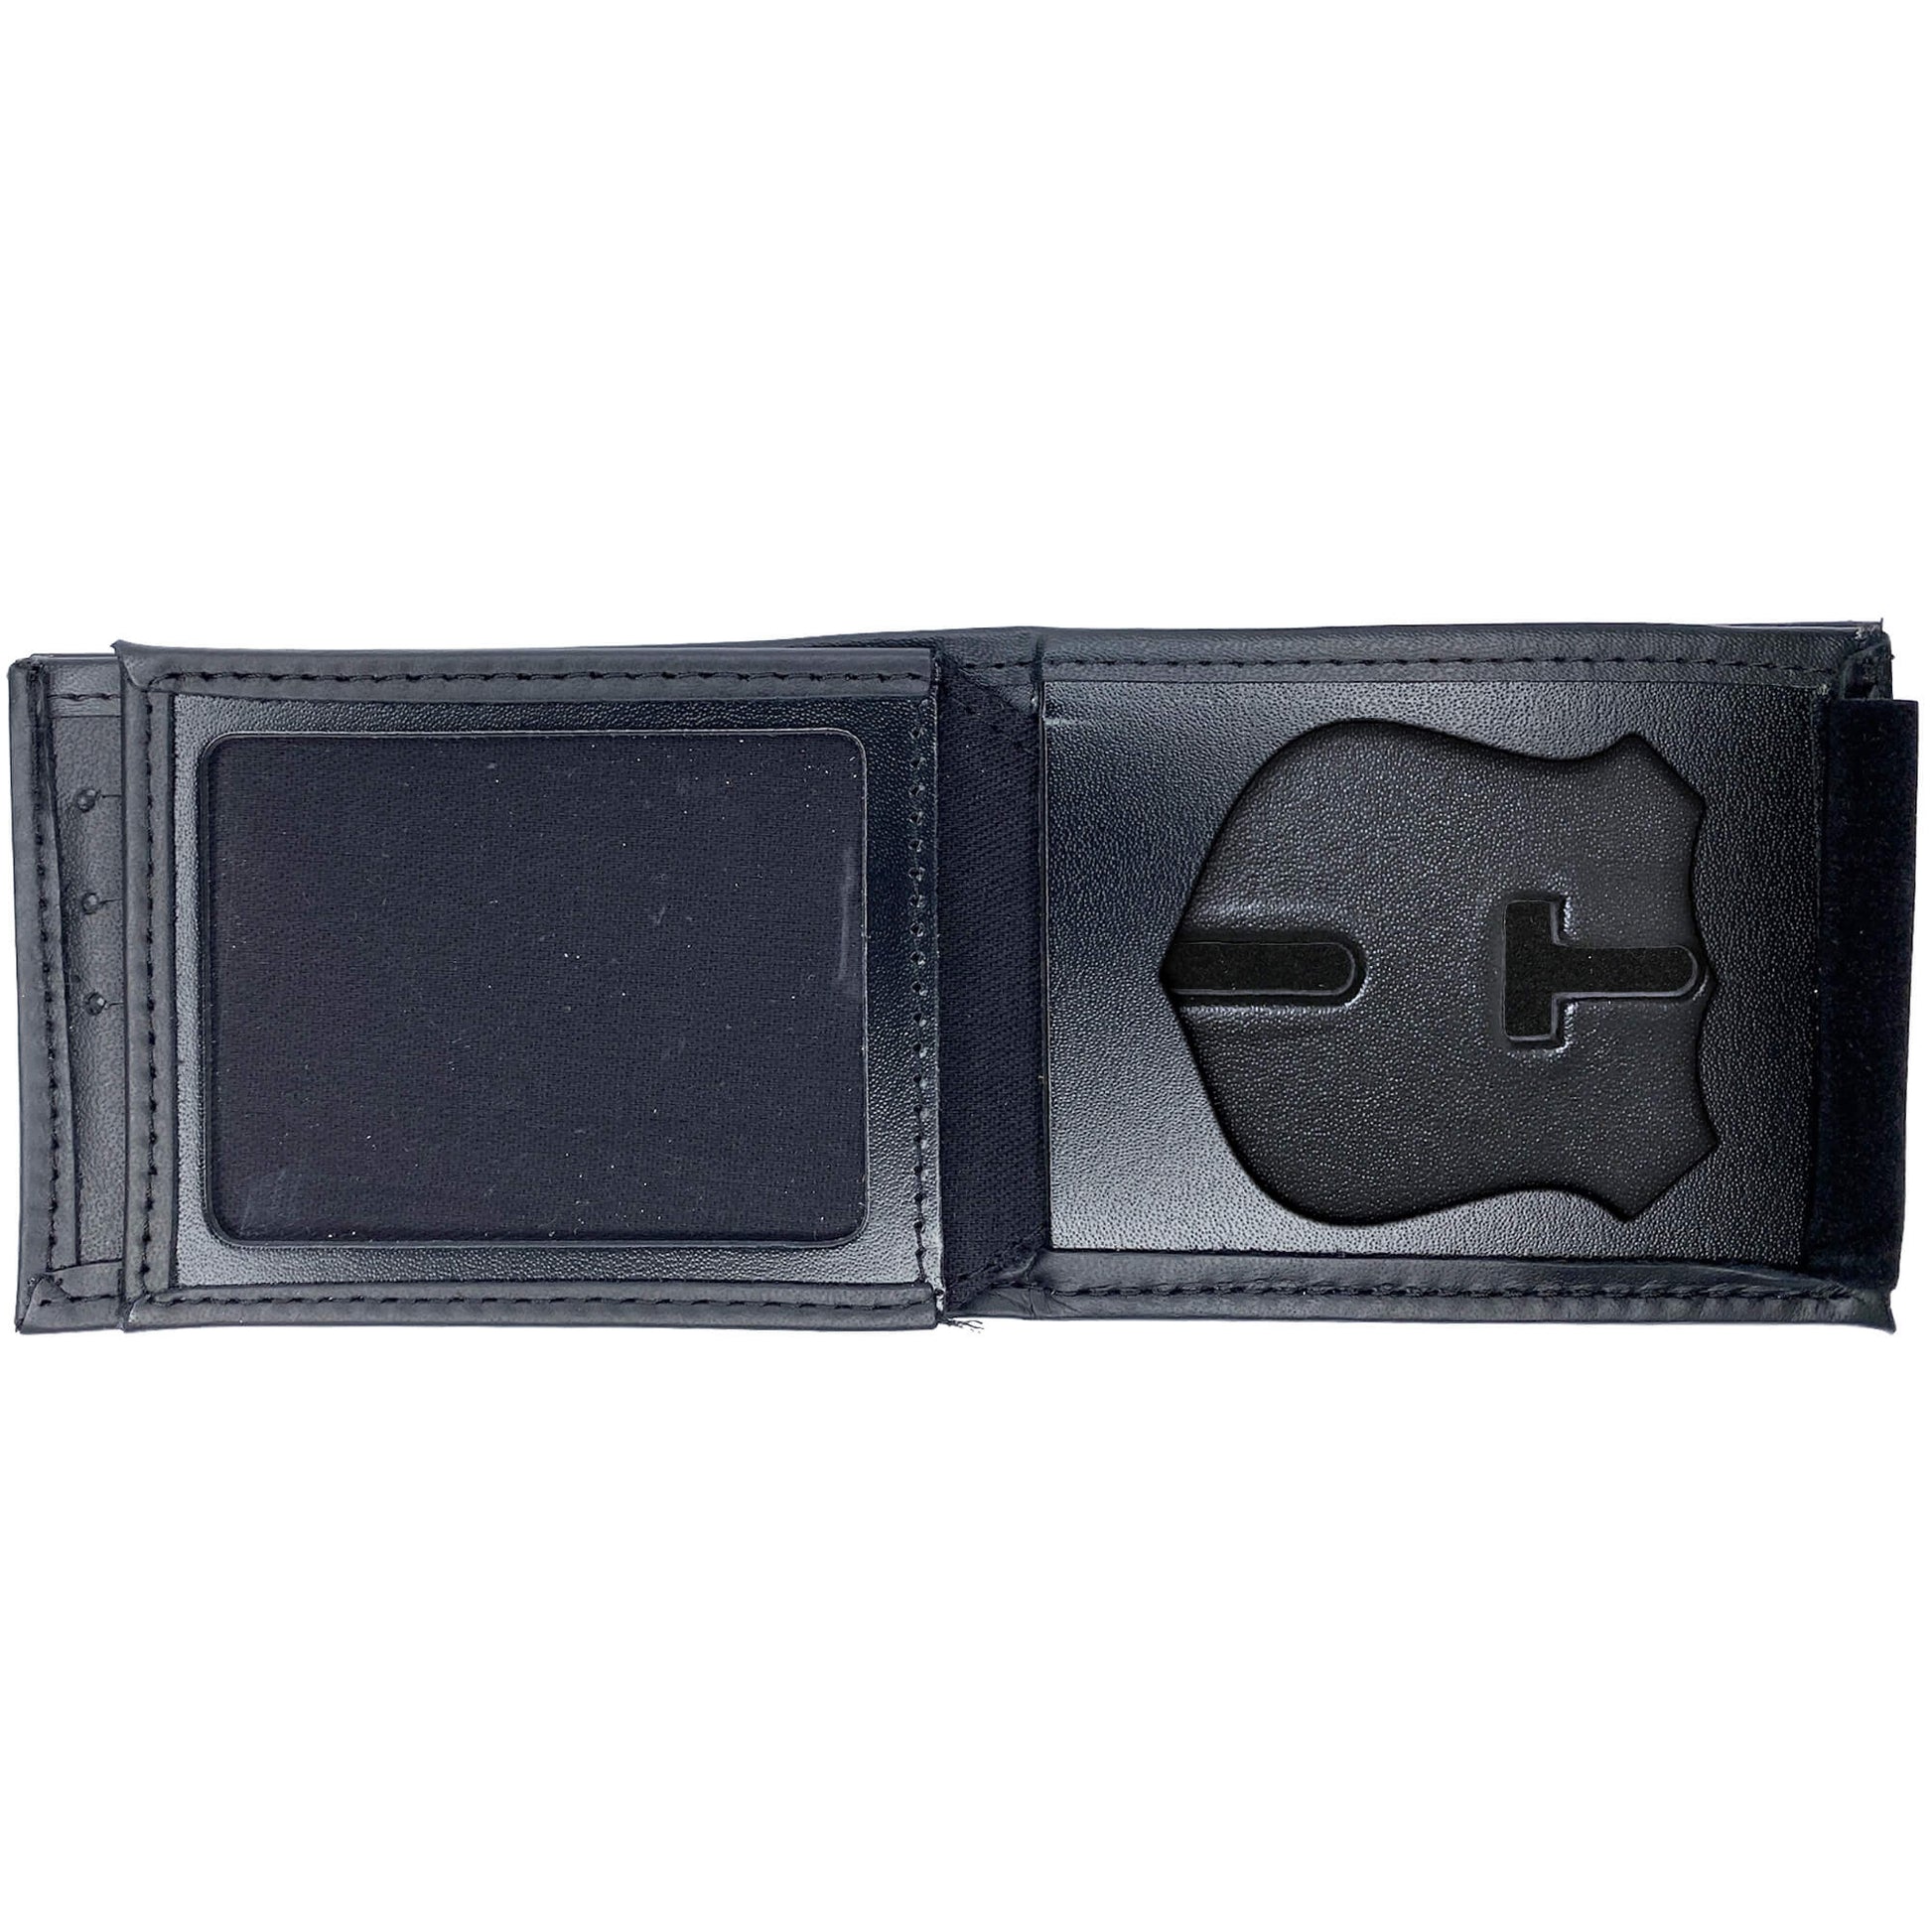 New York Police Department (NYPD) Officer Horizontal Bifold Hidden Badge Wallet-Perfect Fit-911 Duty Gear USA